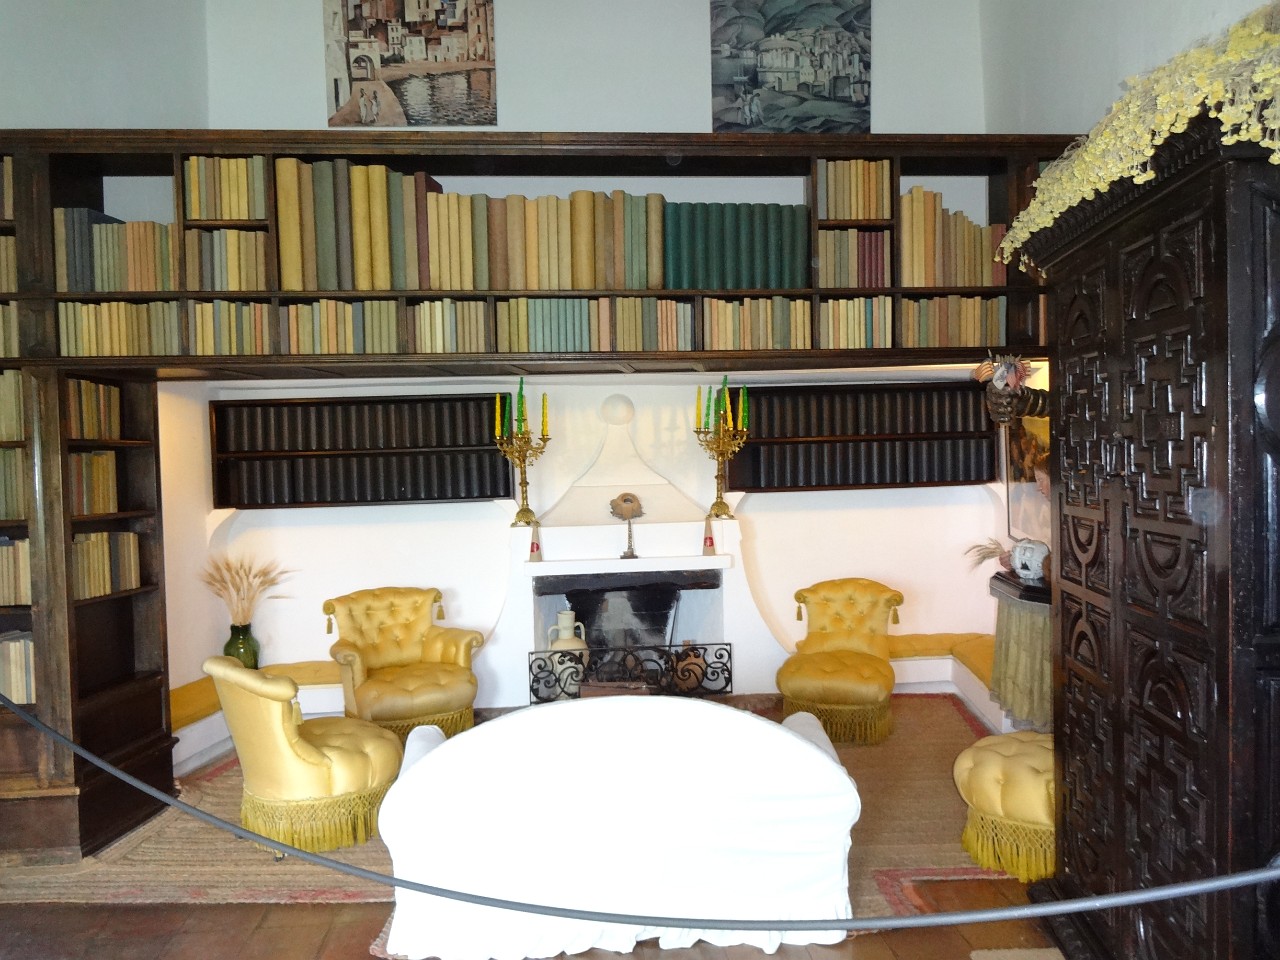 Casa Dali library and living room